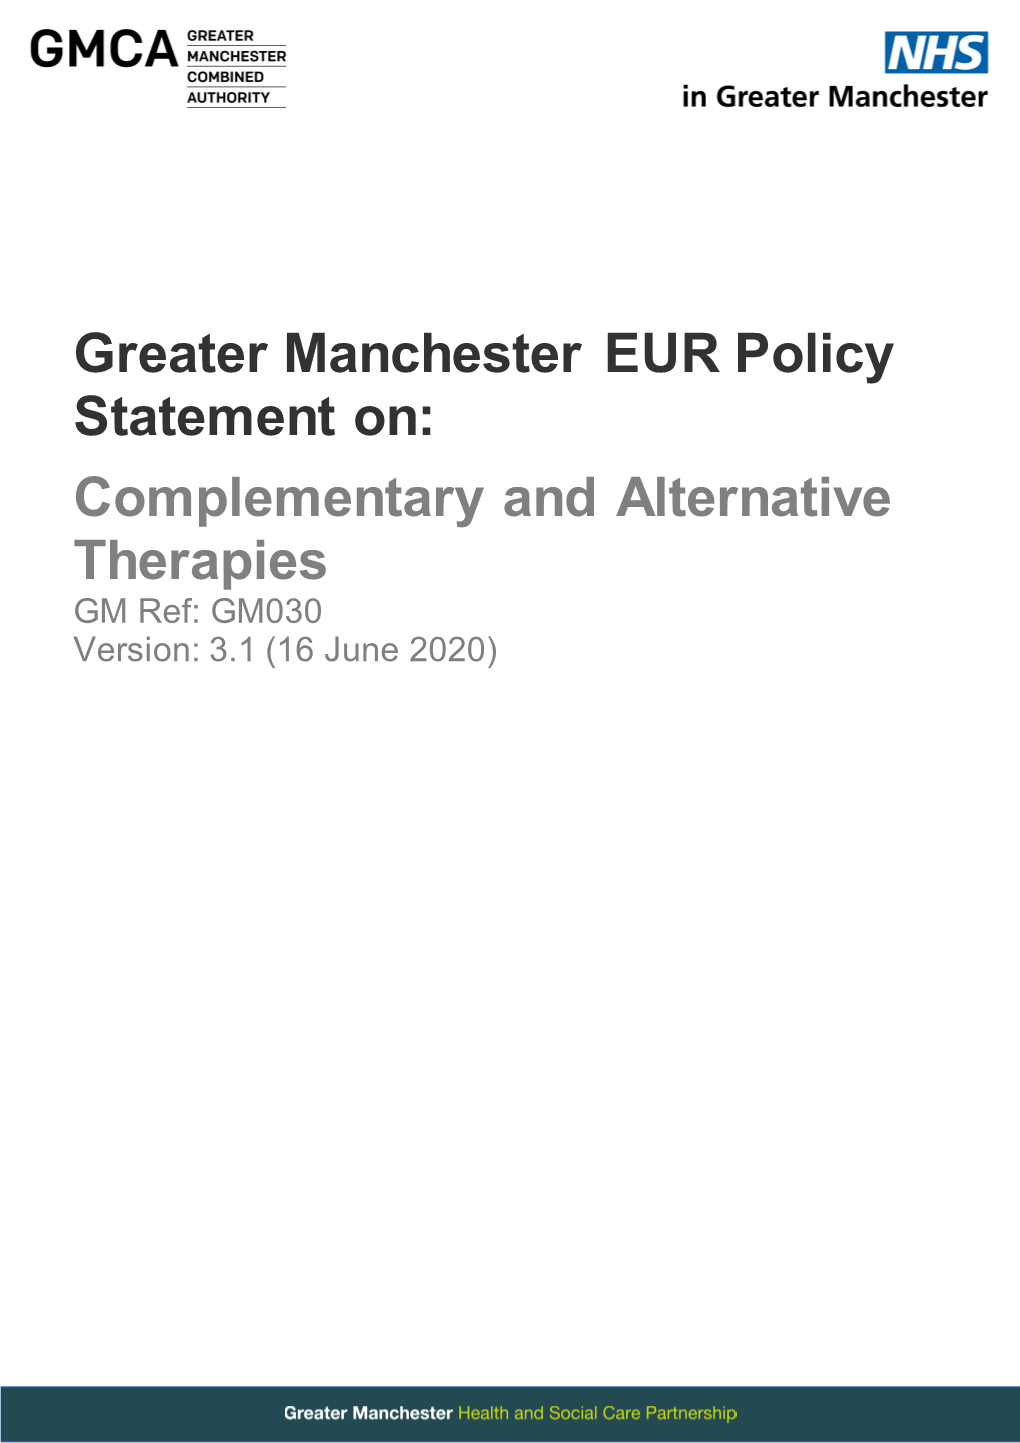 GM Complementary & Alternative Therapies Policy